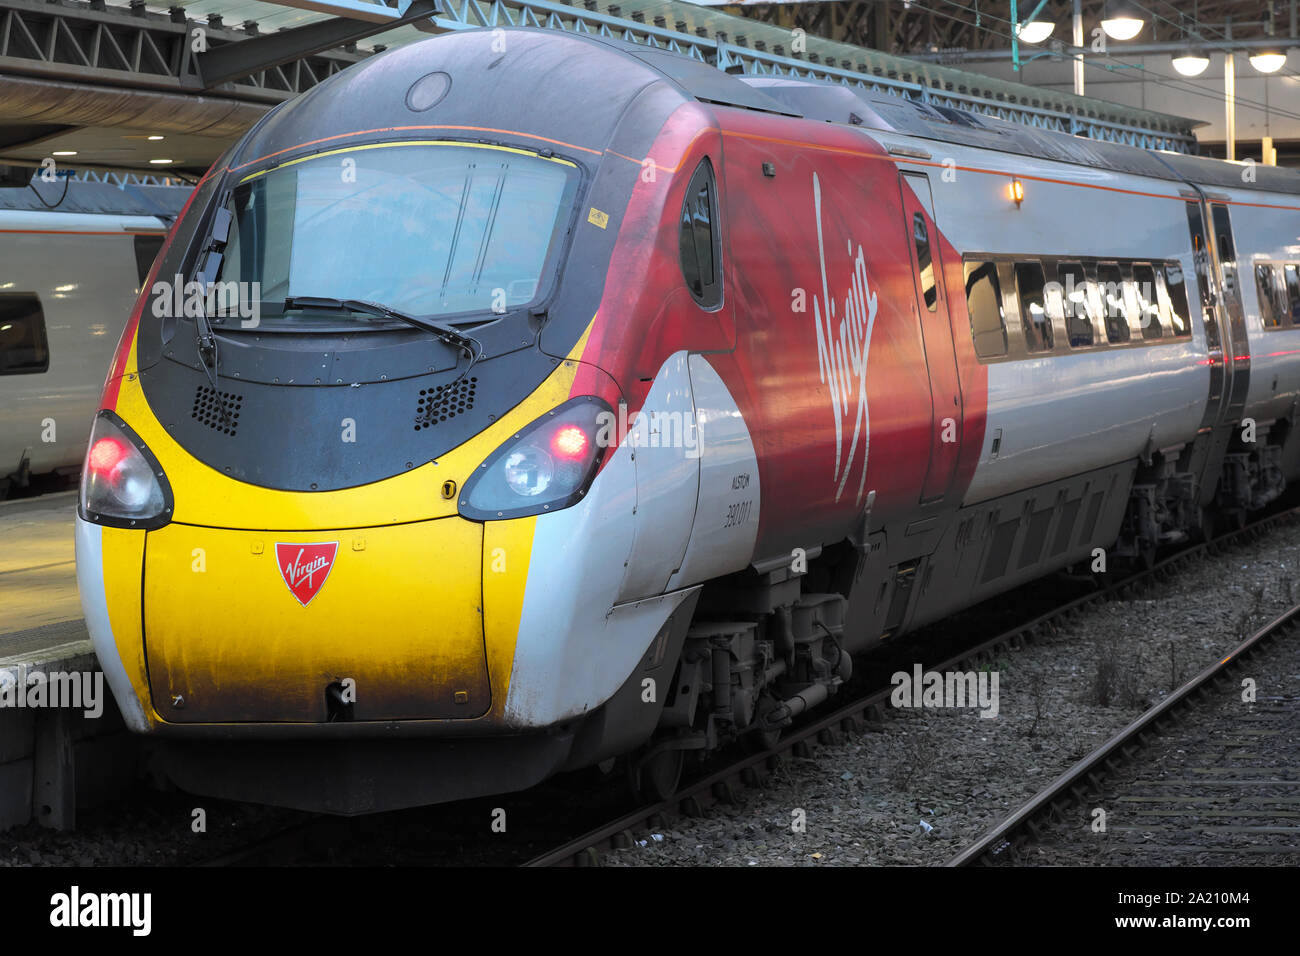 Virgin Trains class 309 Pendolino passenger train at Manchester Piccadilly station in 2019 Stock Photo